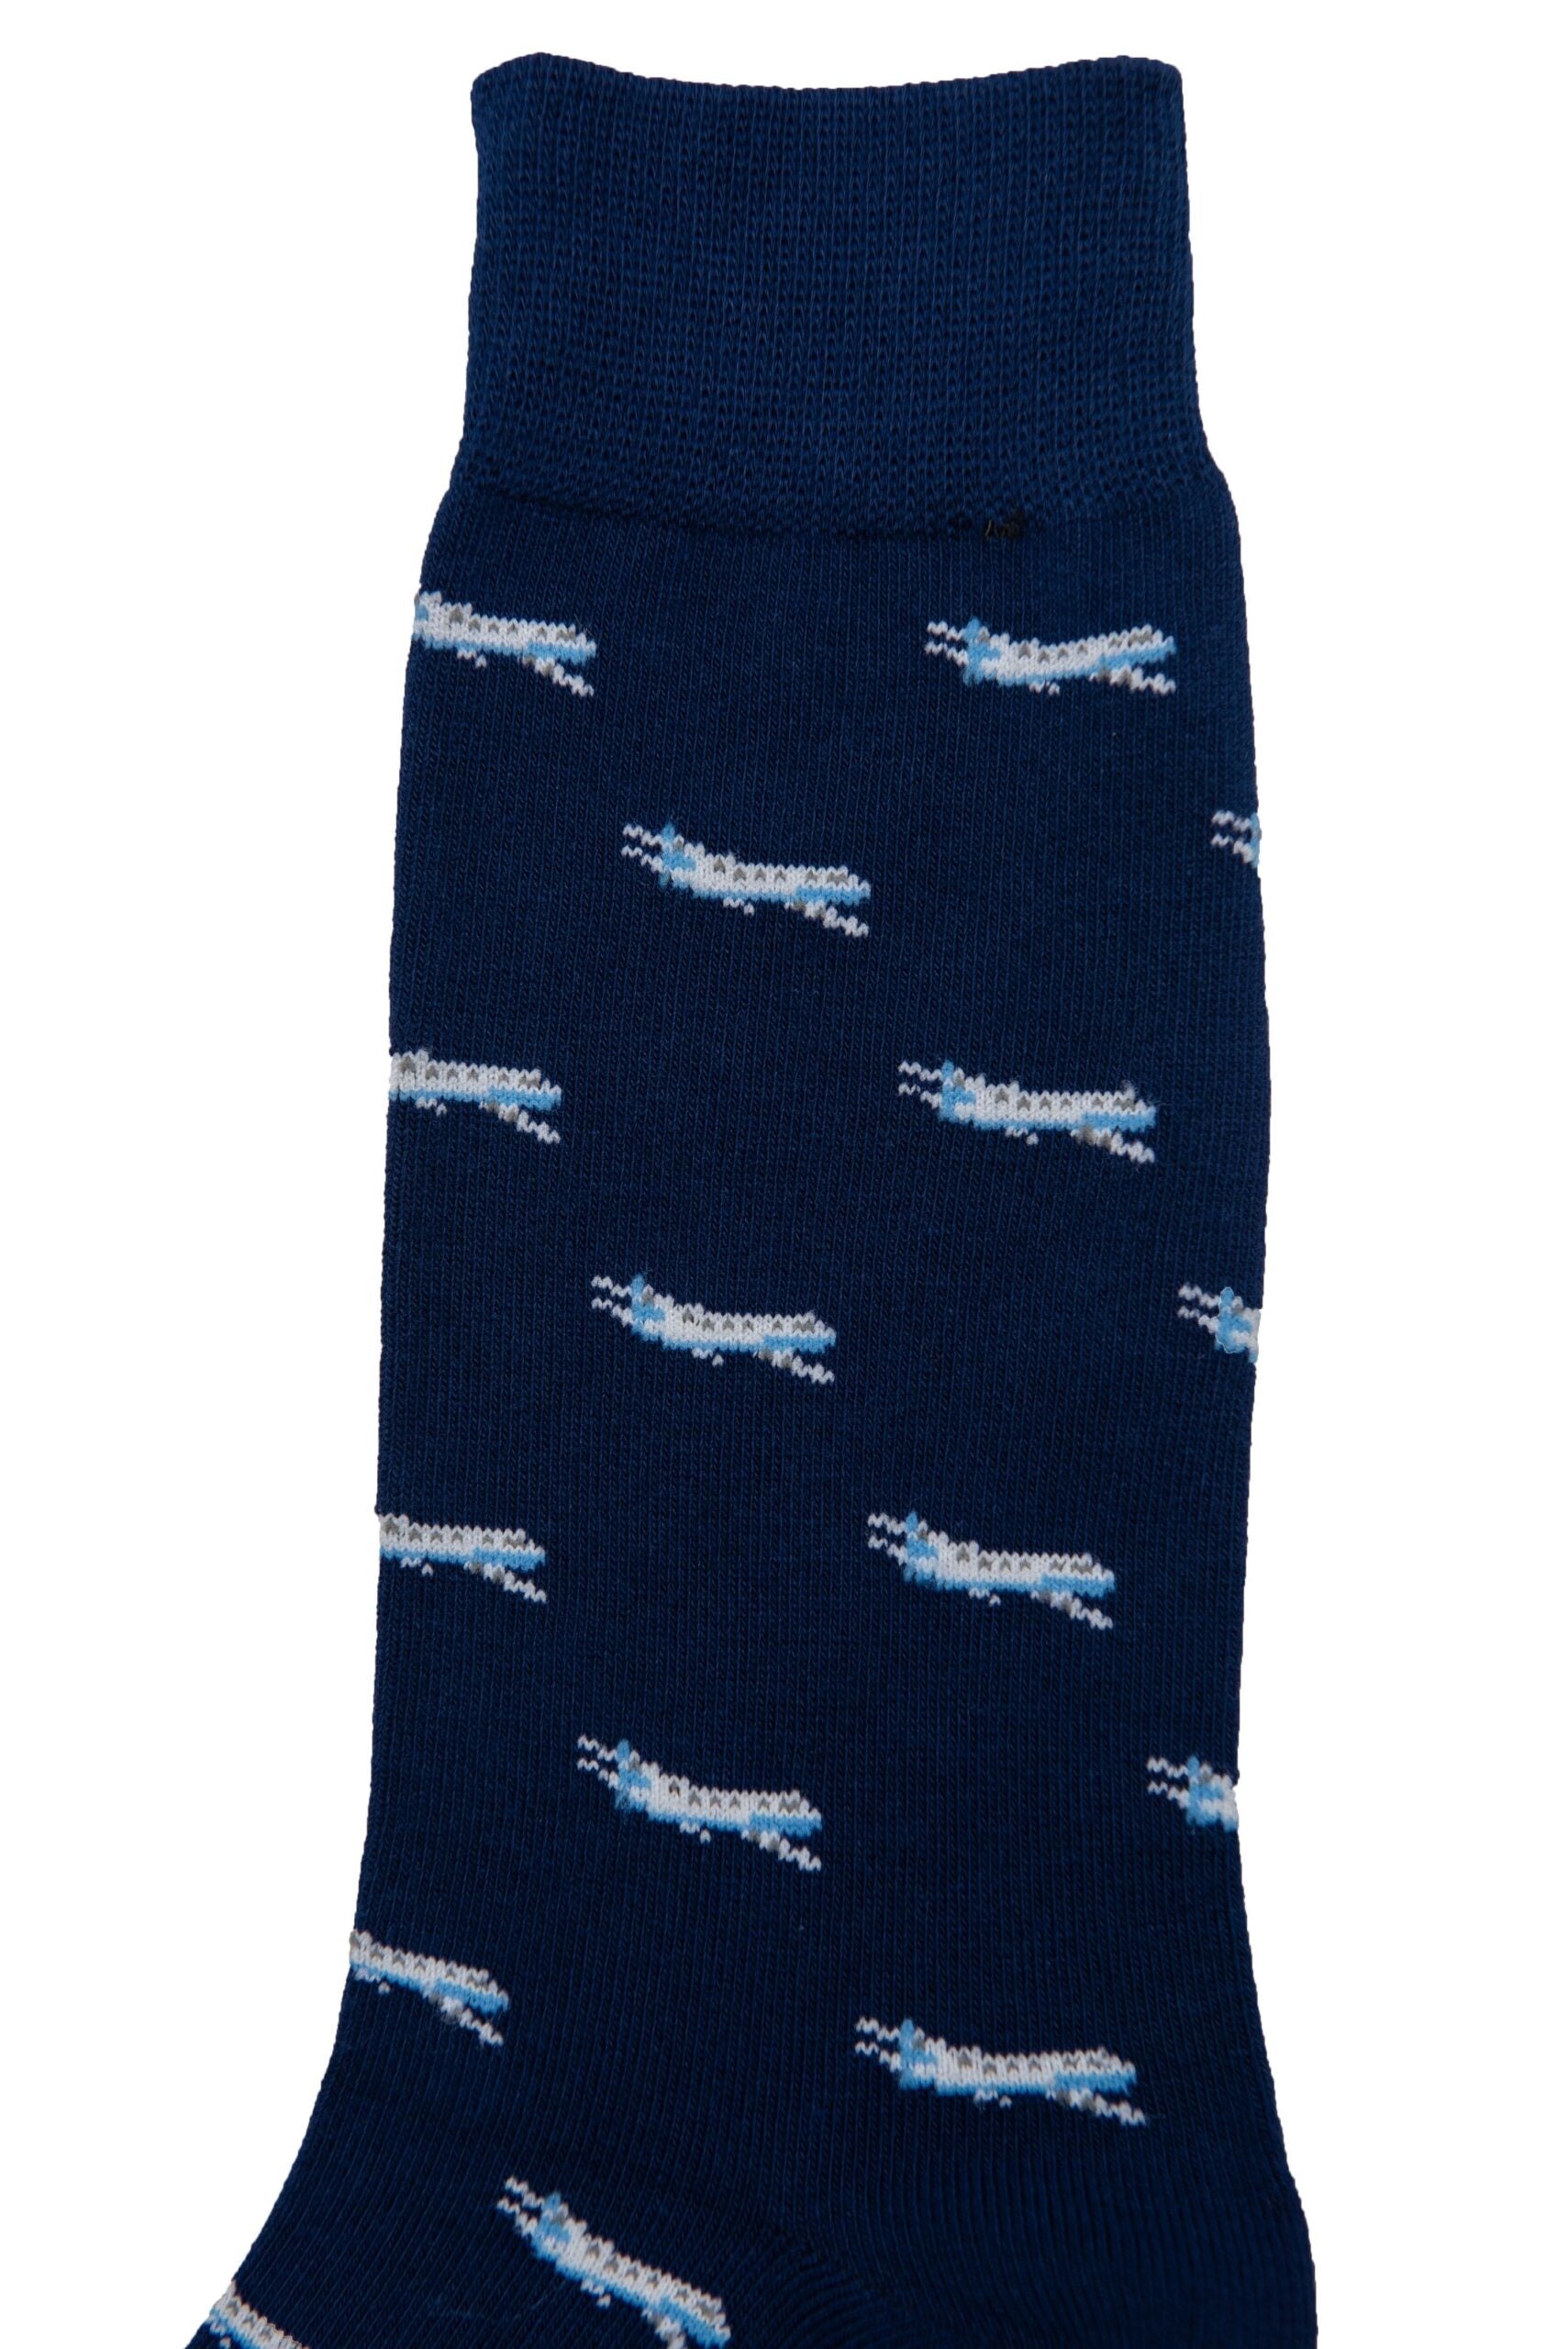 An Aeroplane Sock with blue and white designs.